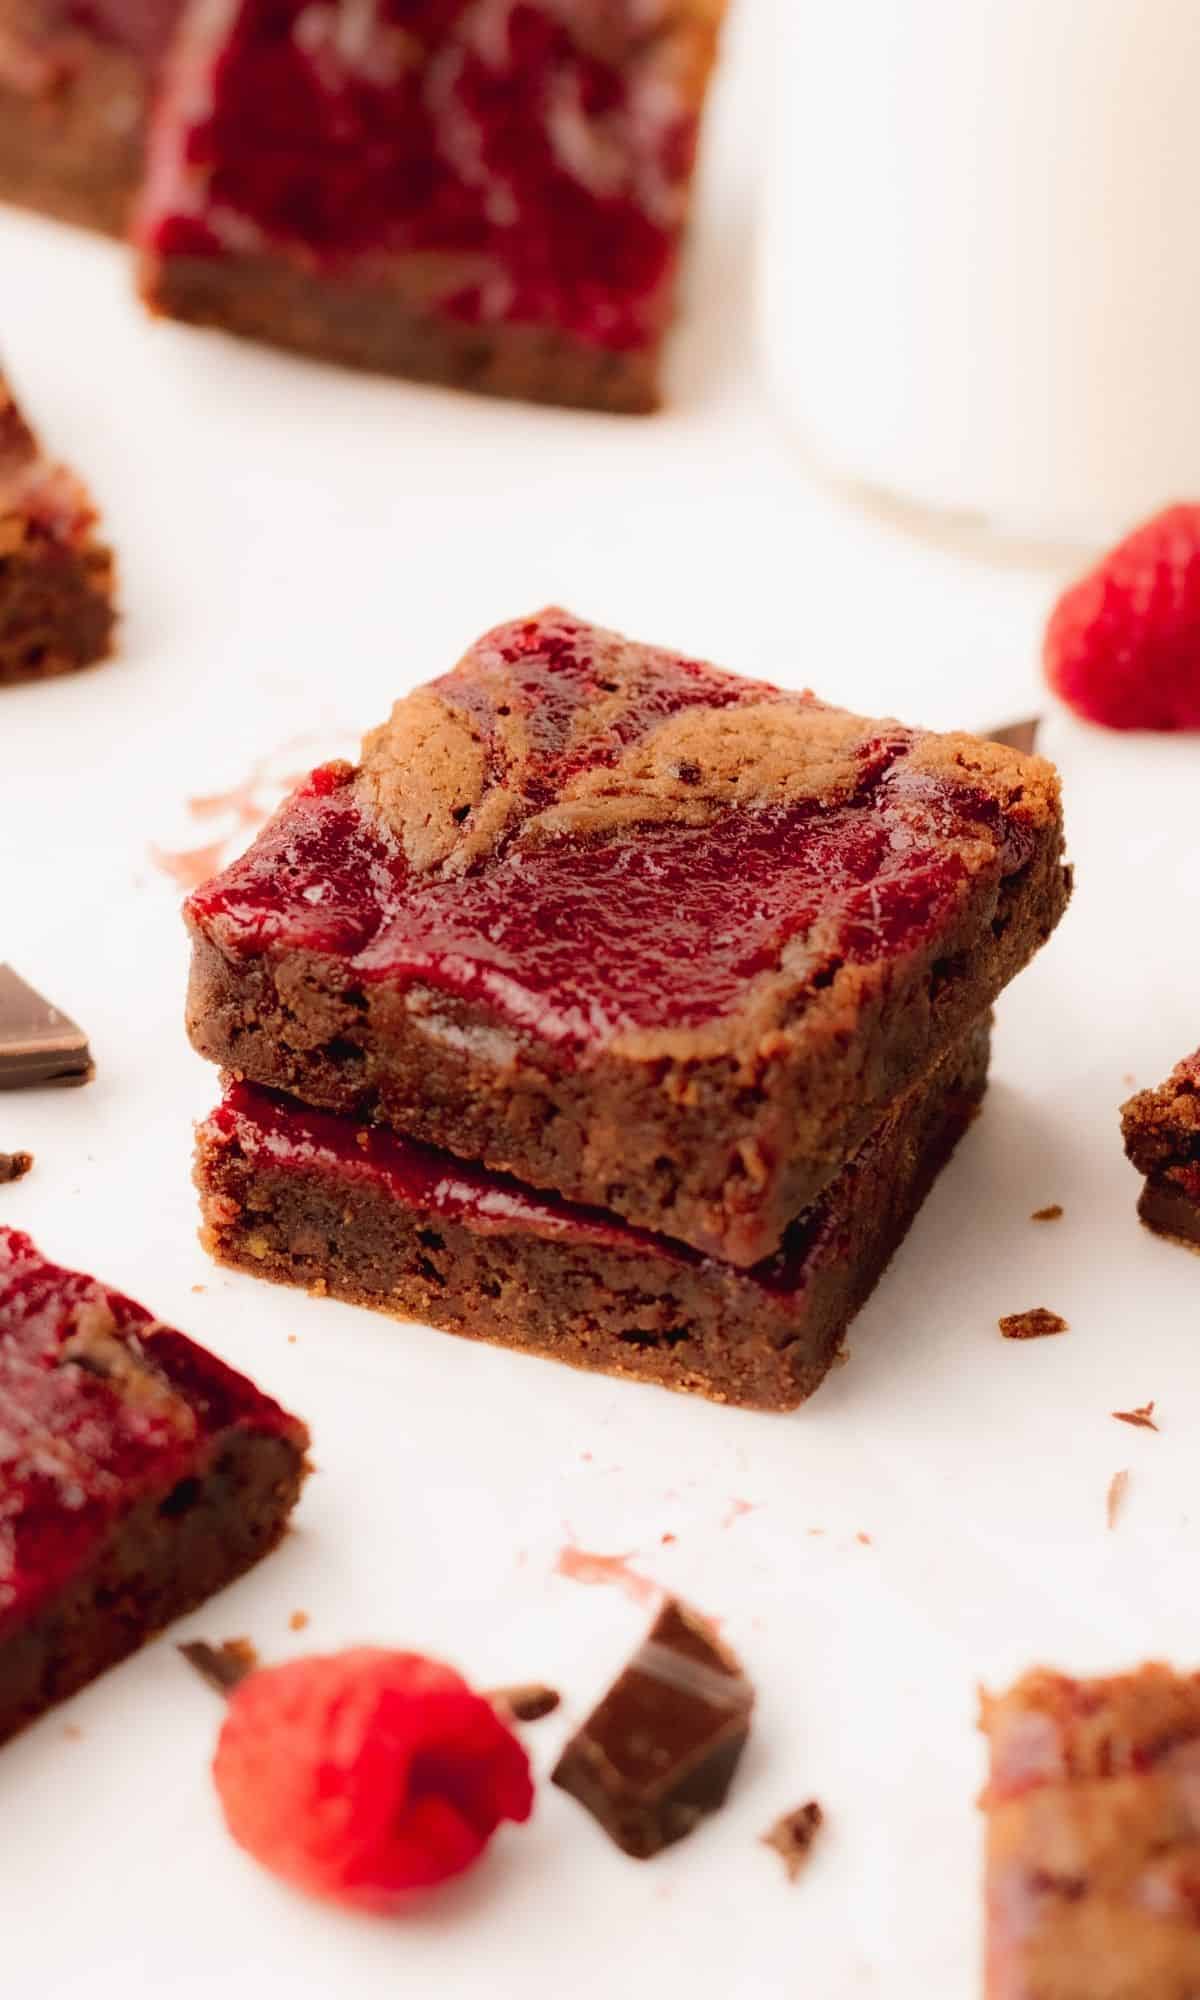 A stack of two chocolate raspberry brownies.